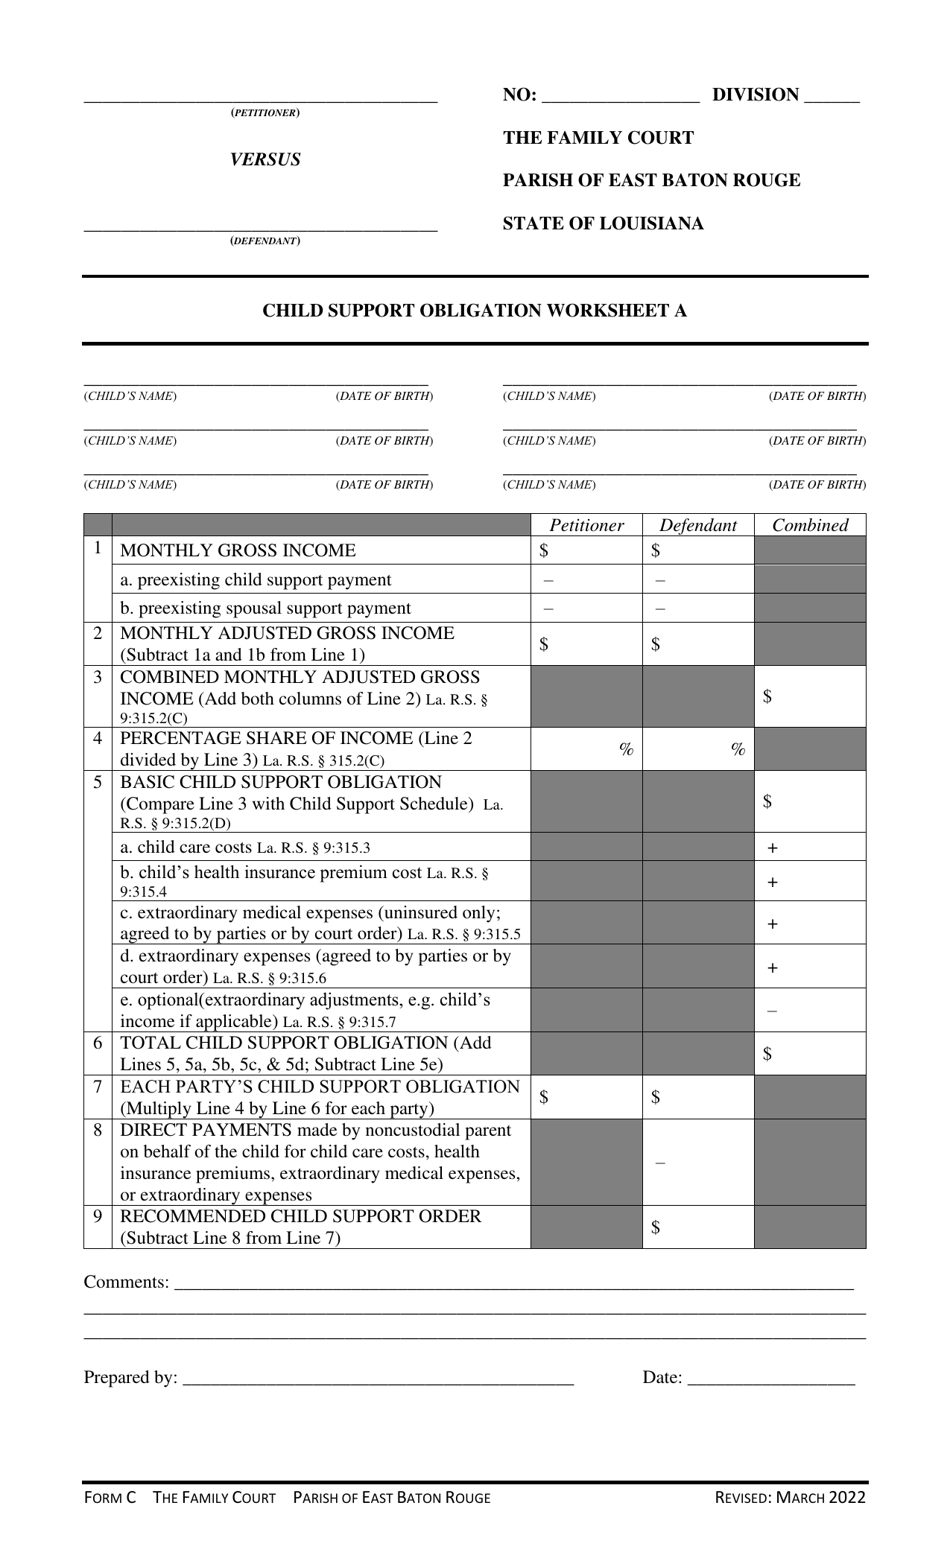 Form C Worksheet A Child Support Obligation - Parish of East Baton Rouge, Louisiana, Page 1